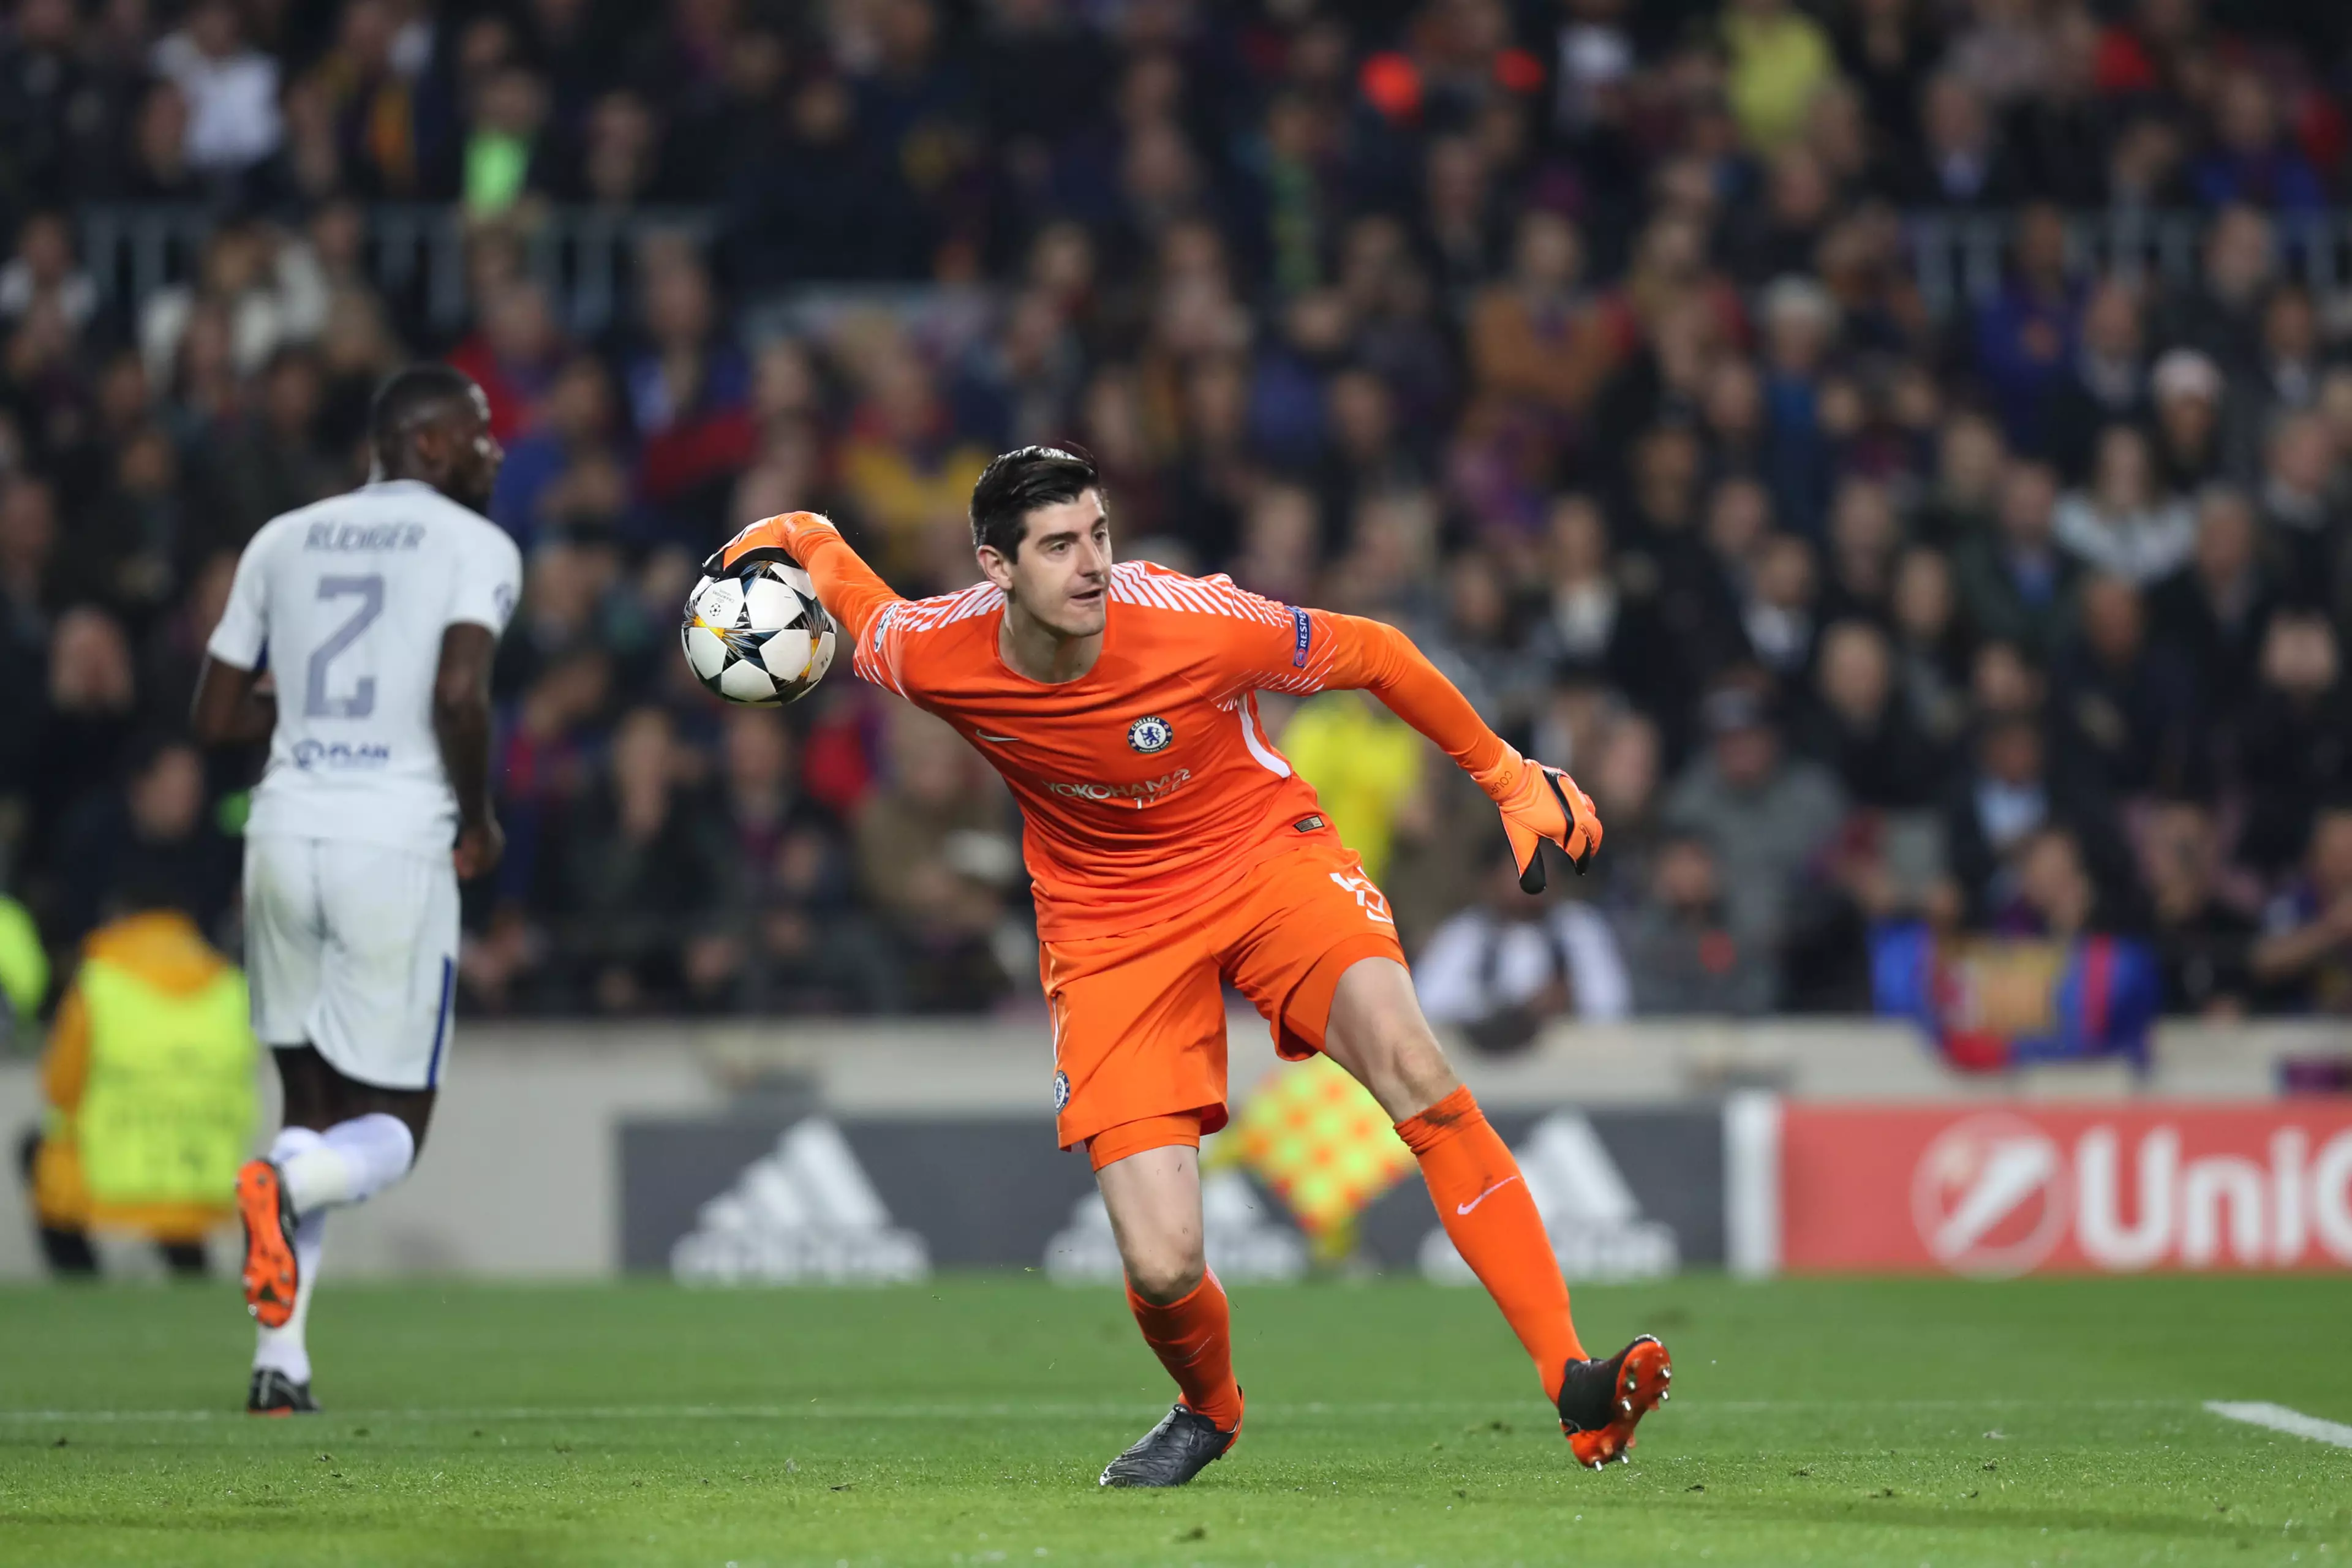 Courtois has been excellent for Chelsea since replacing Petr Cech as number one. Image: PA Images